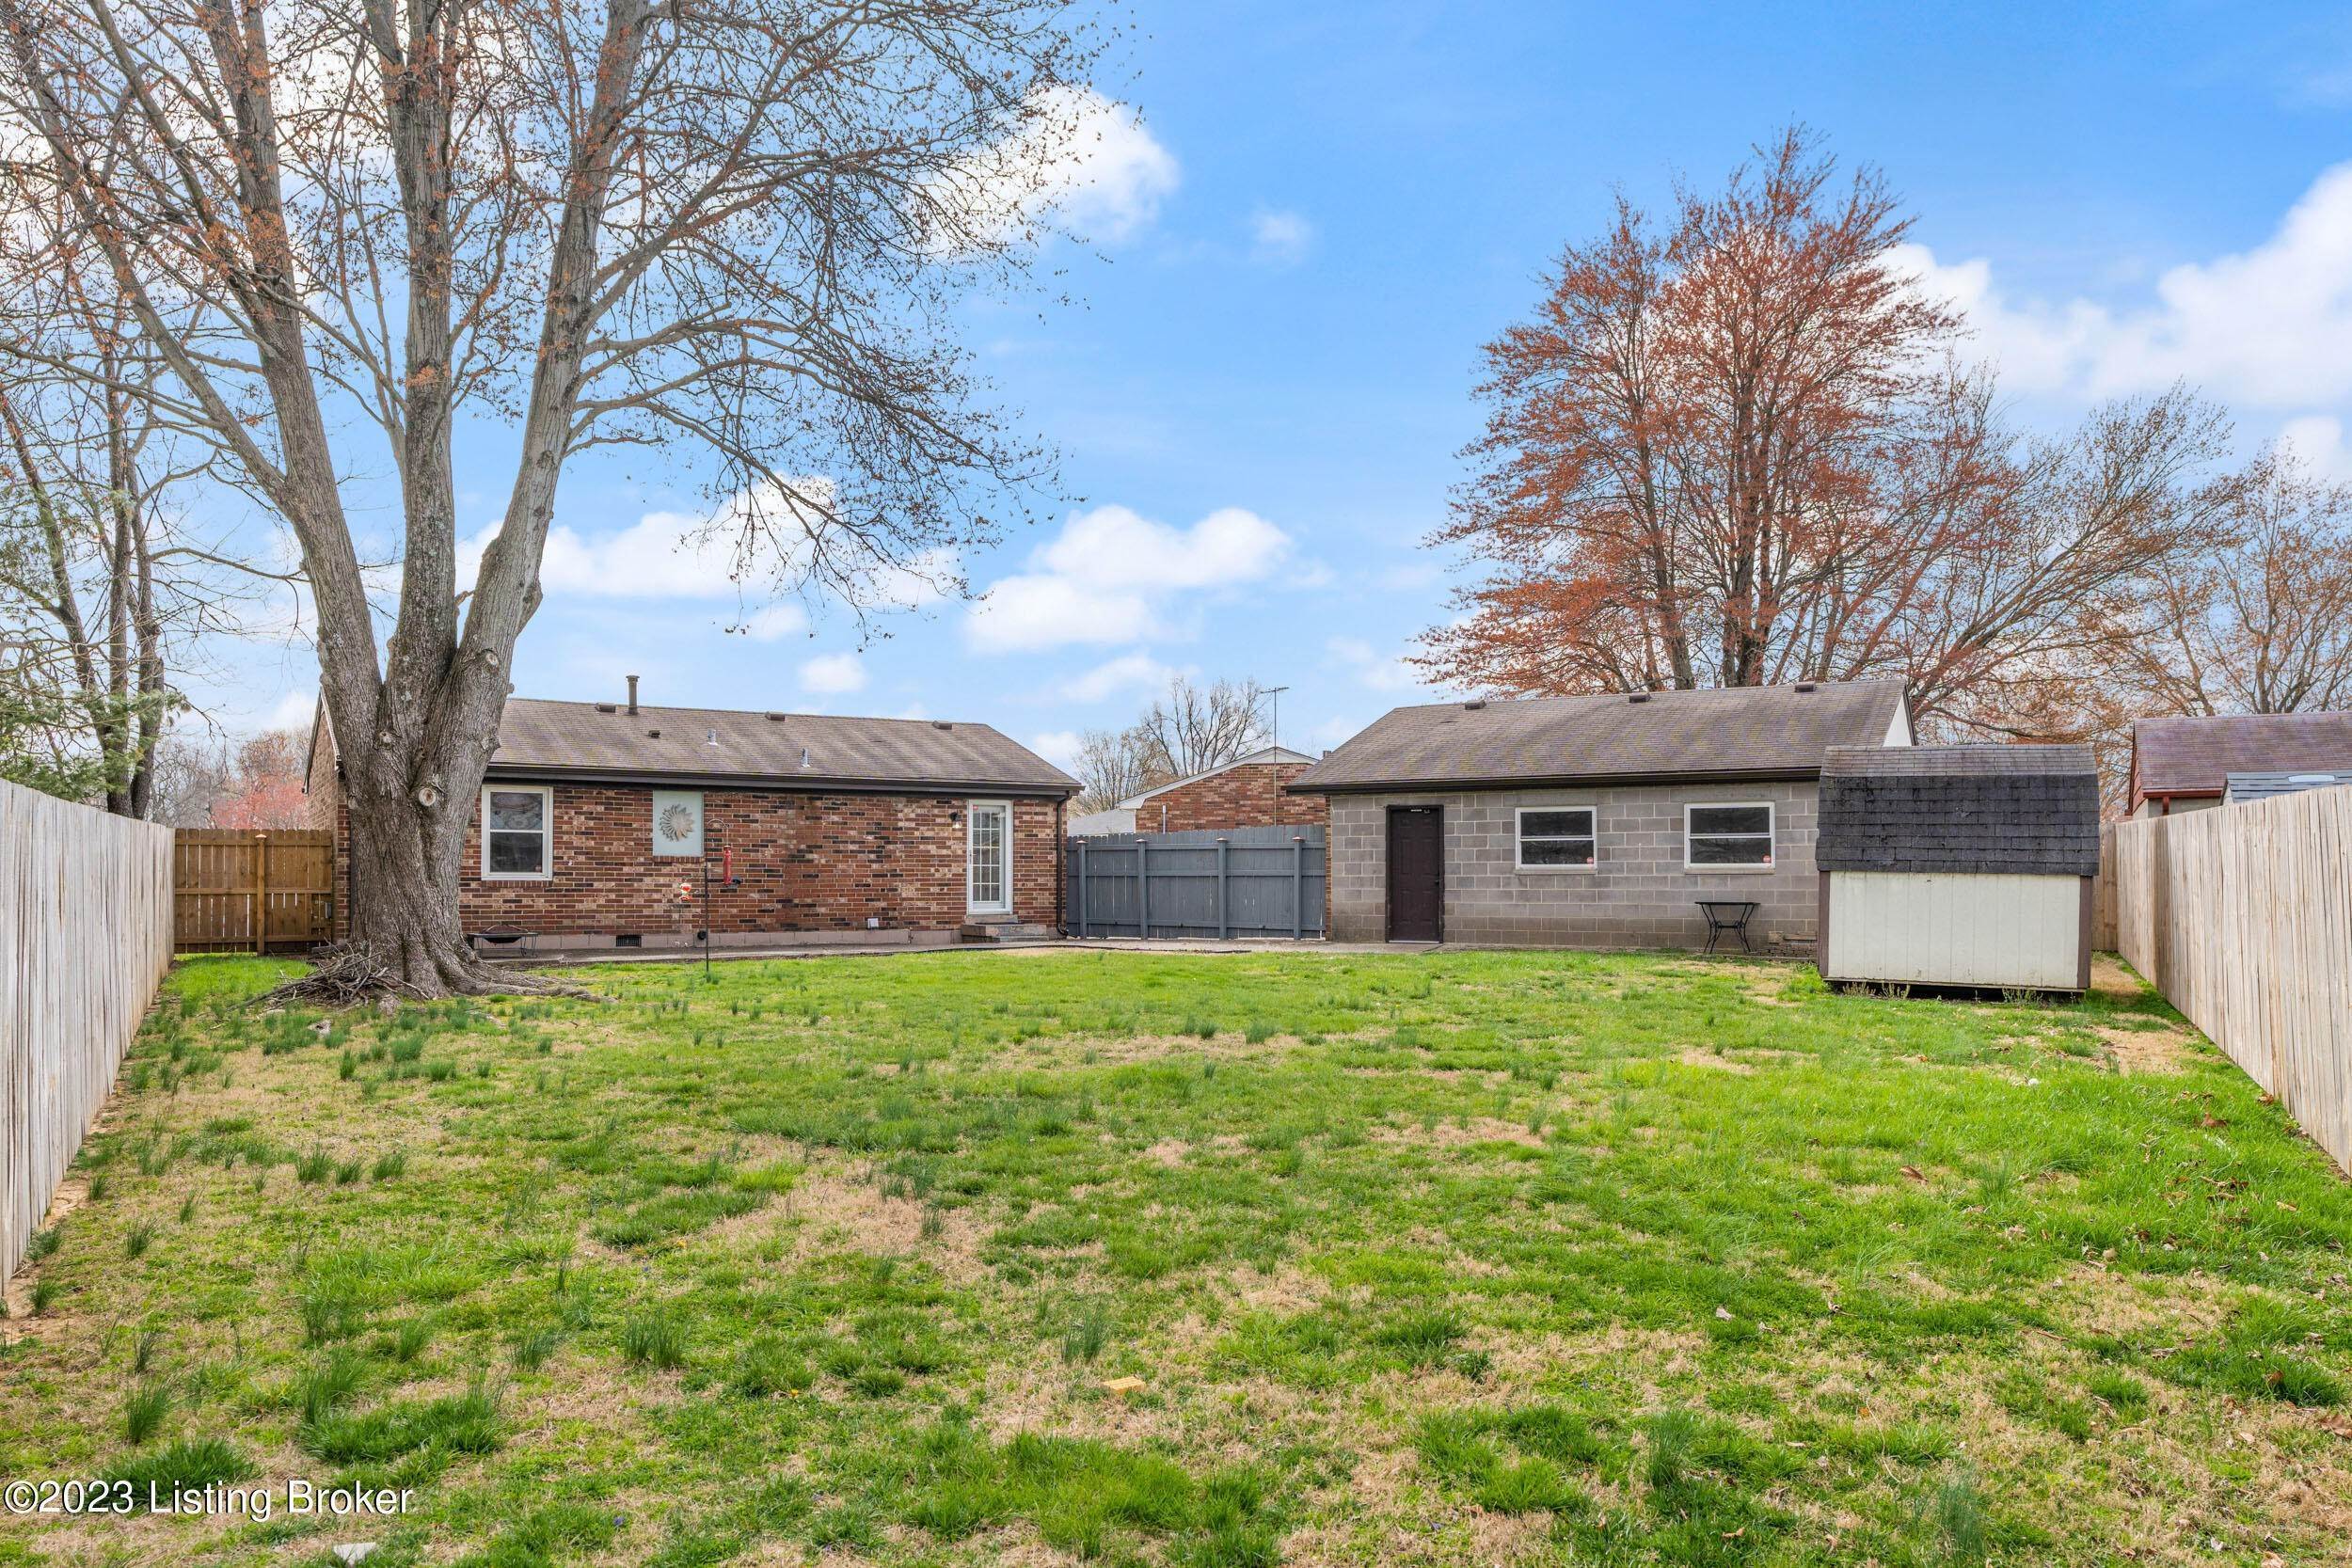 25. Single Family at Louisville, KY 40229